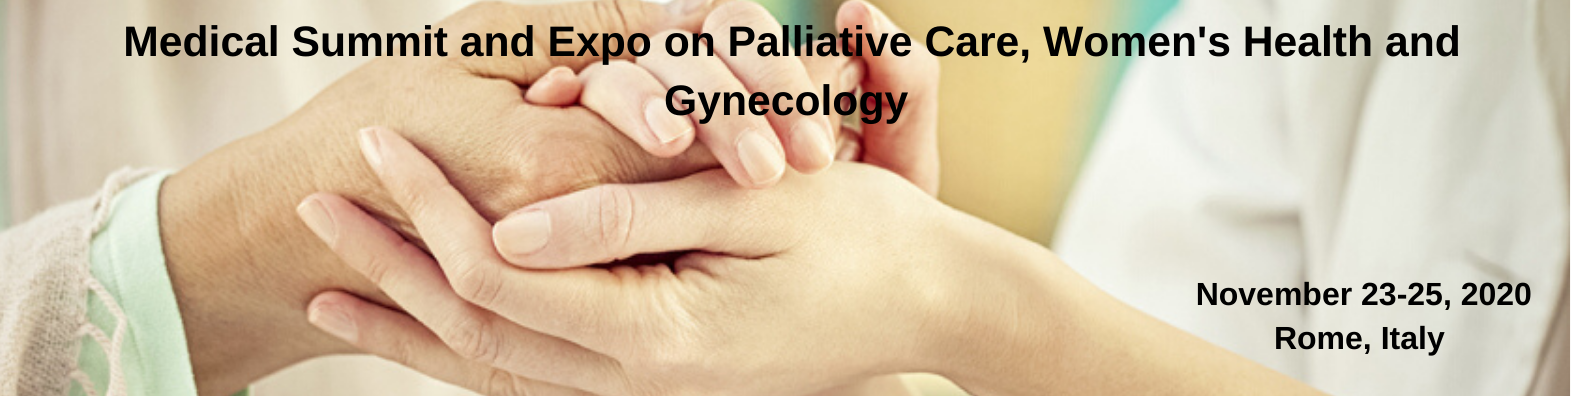 Medical Summit and Expo on Palliative Care, Women's health and Gynecology